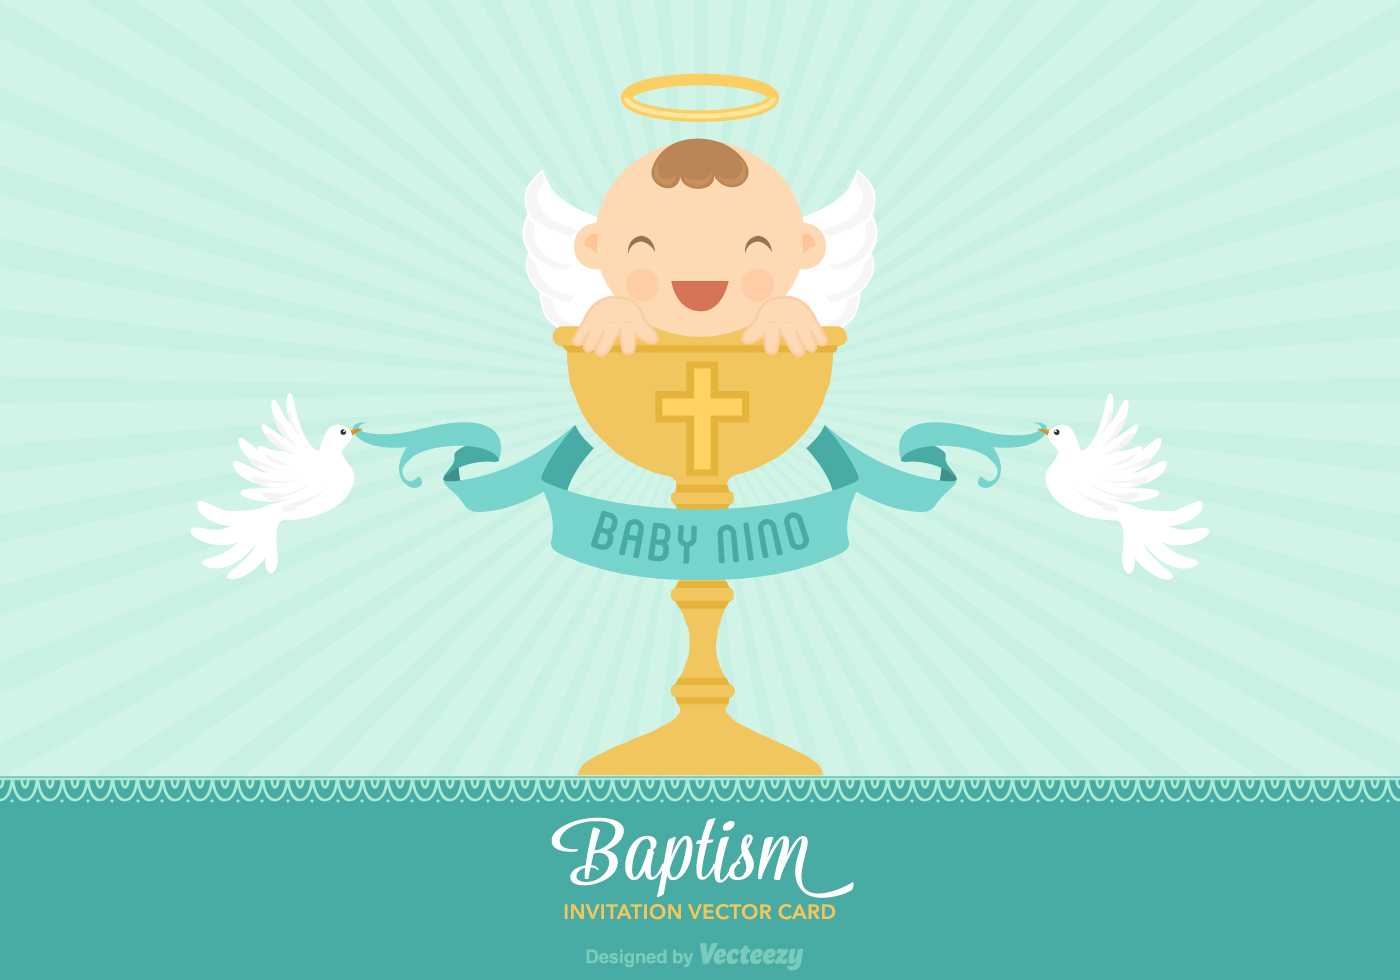 Christening Banner Free Vector Art – (19 Free Downloads) With Regard To Christening Banner Template Free